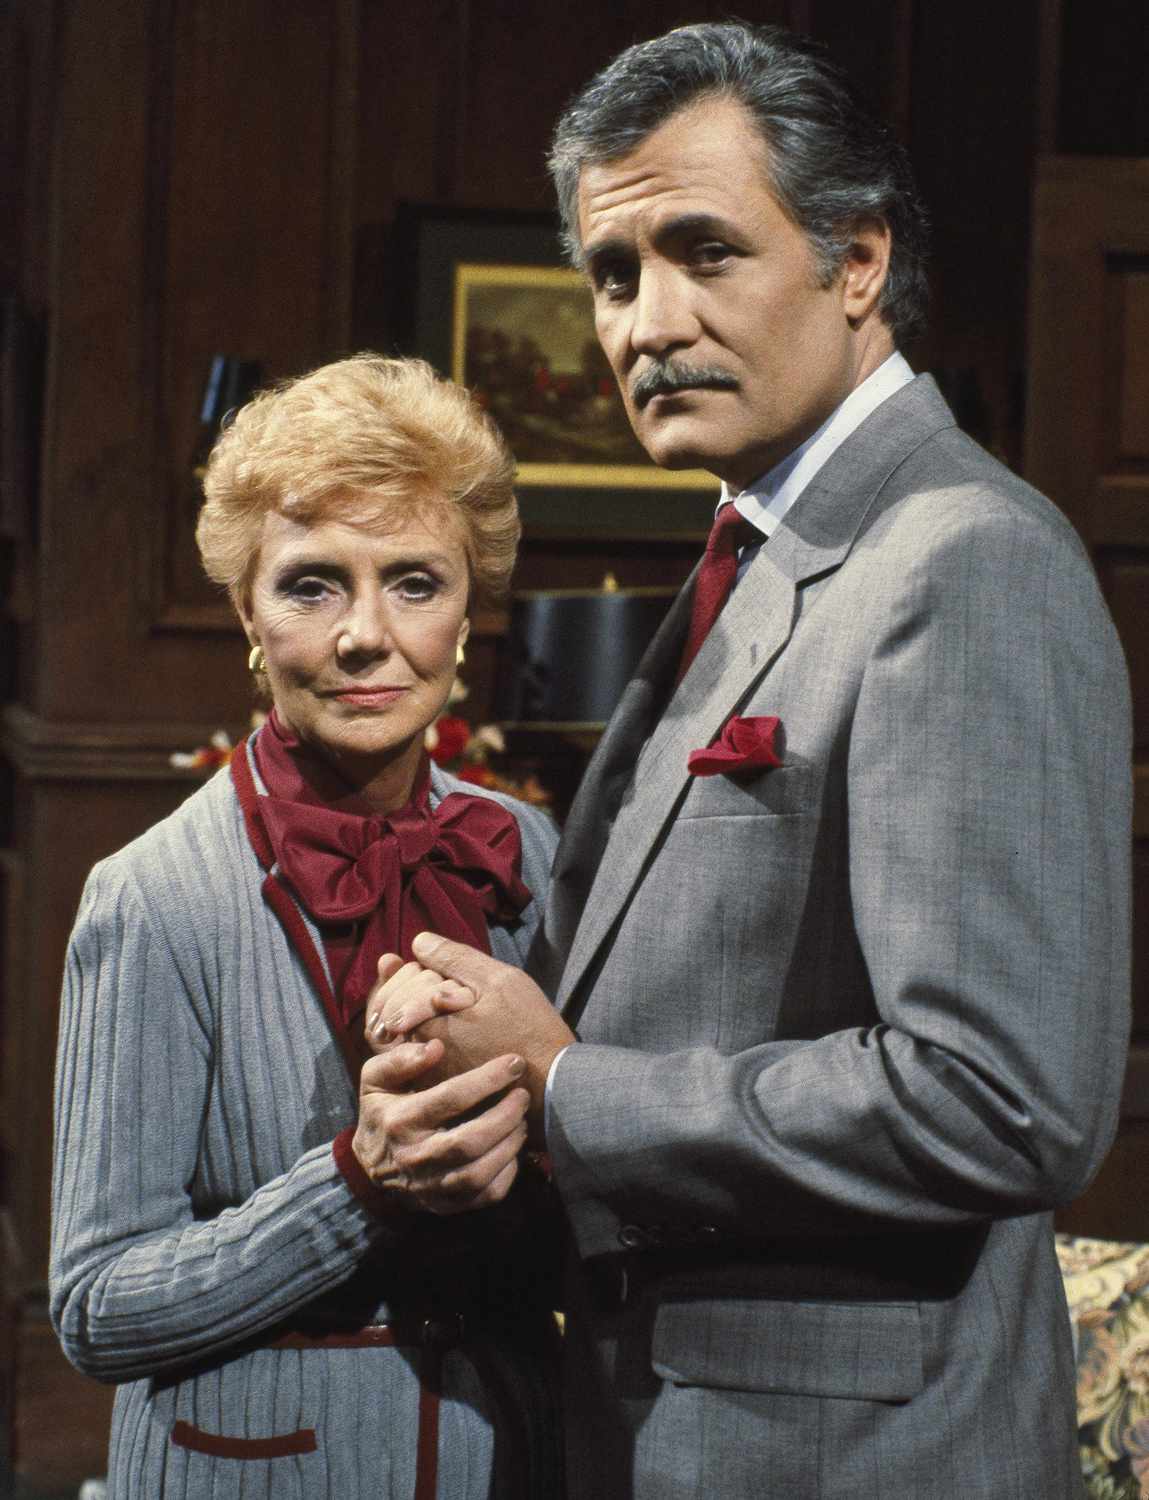 DAYS OF OUR LIVES -- Pictured: (l-r) Peggy McCay as Caroline Brady, John Aniston as Victor Kiriakis